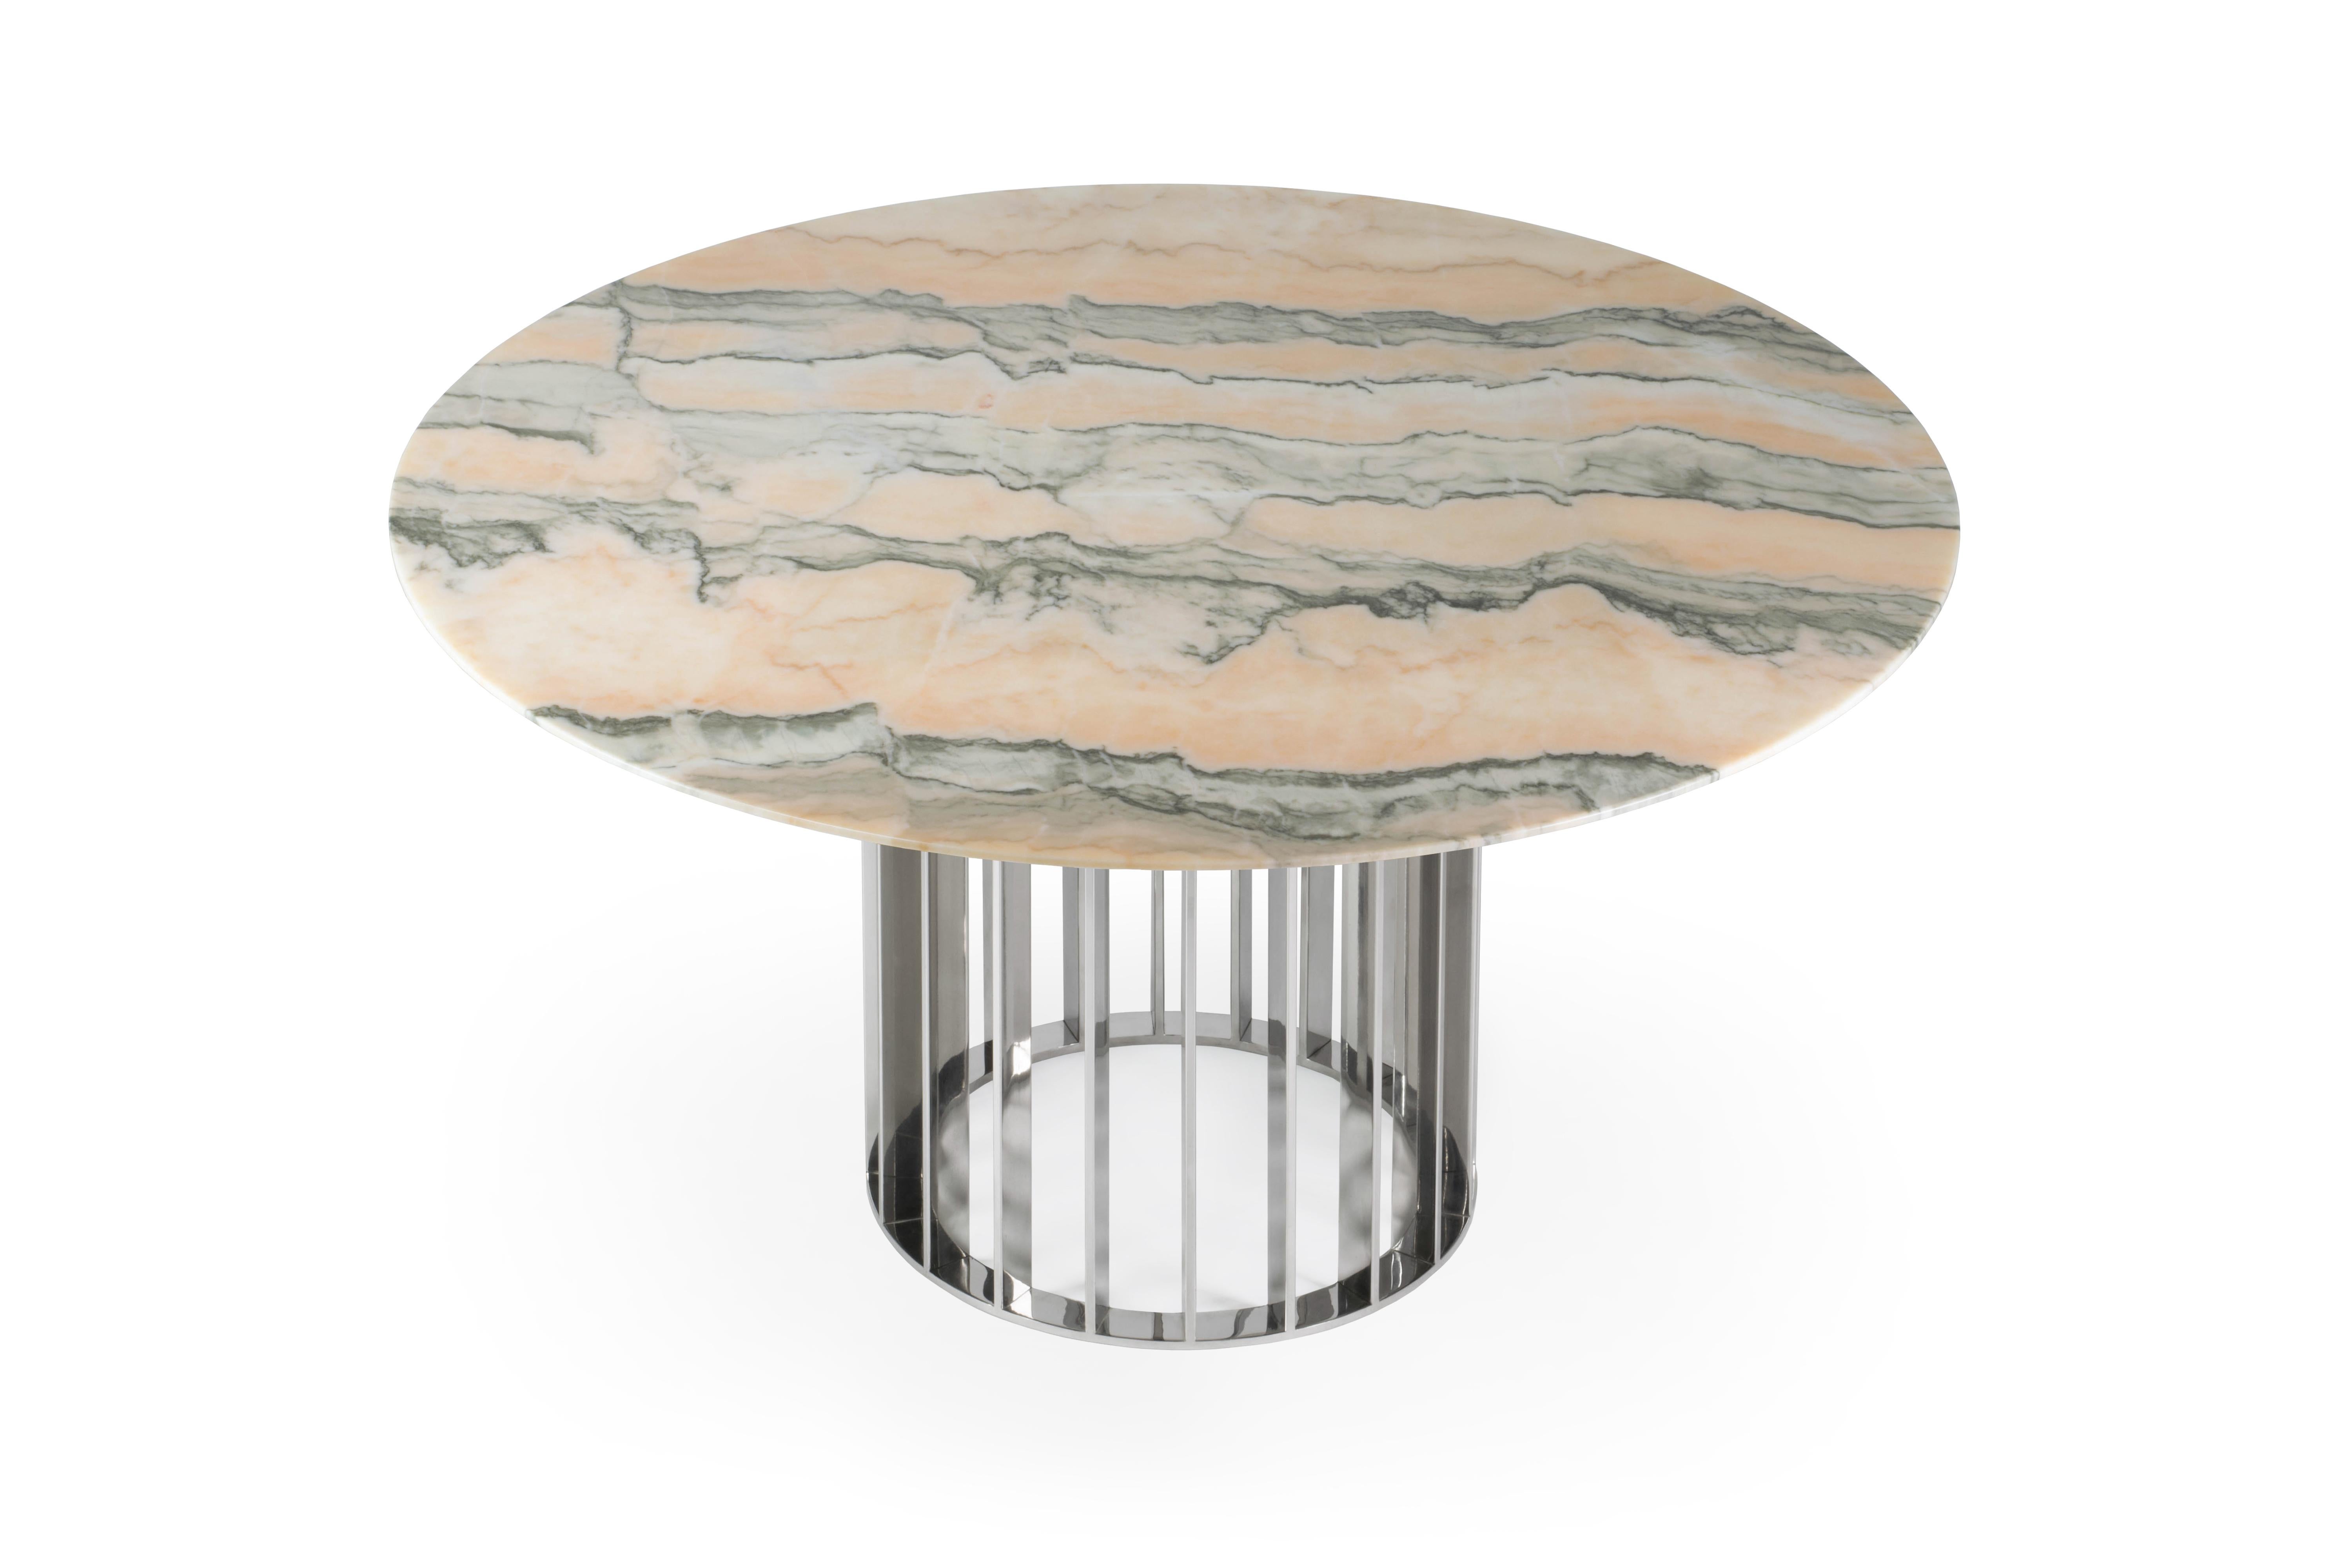 This unique dining table uses gorgeous White Carrara matte finishing marble top and elegant and modern stainless steel base uses the repetition of metal stripes to bring rhythm to the base. Its design is simple but full of grace and WOW factor.